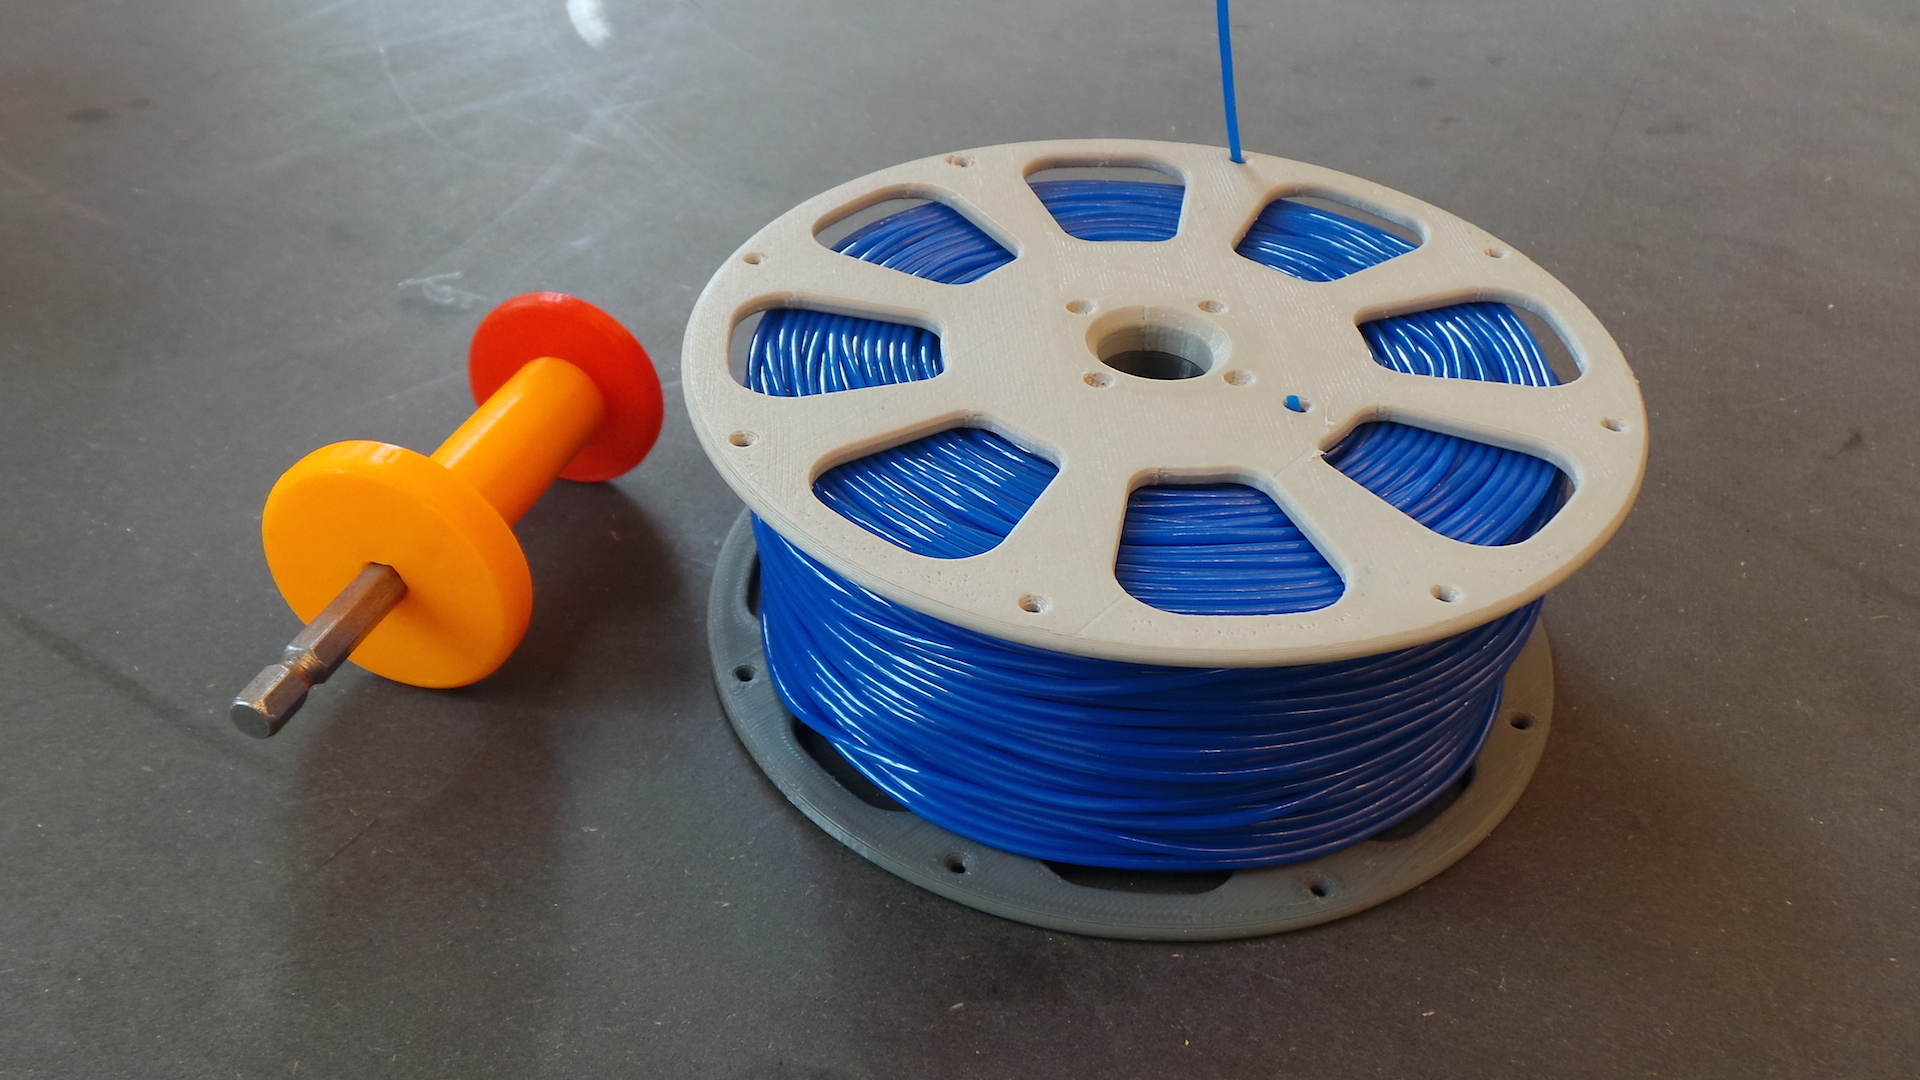 3D-printable split filament spool with threaded joint (135 mm)